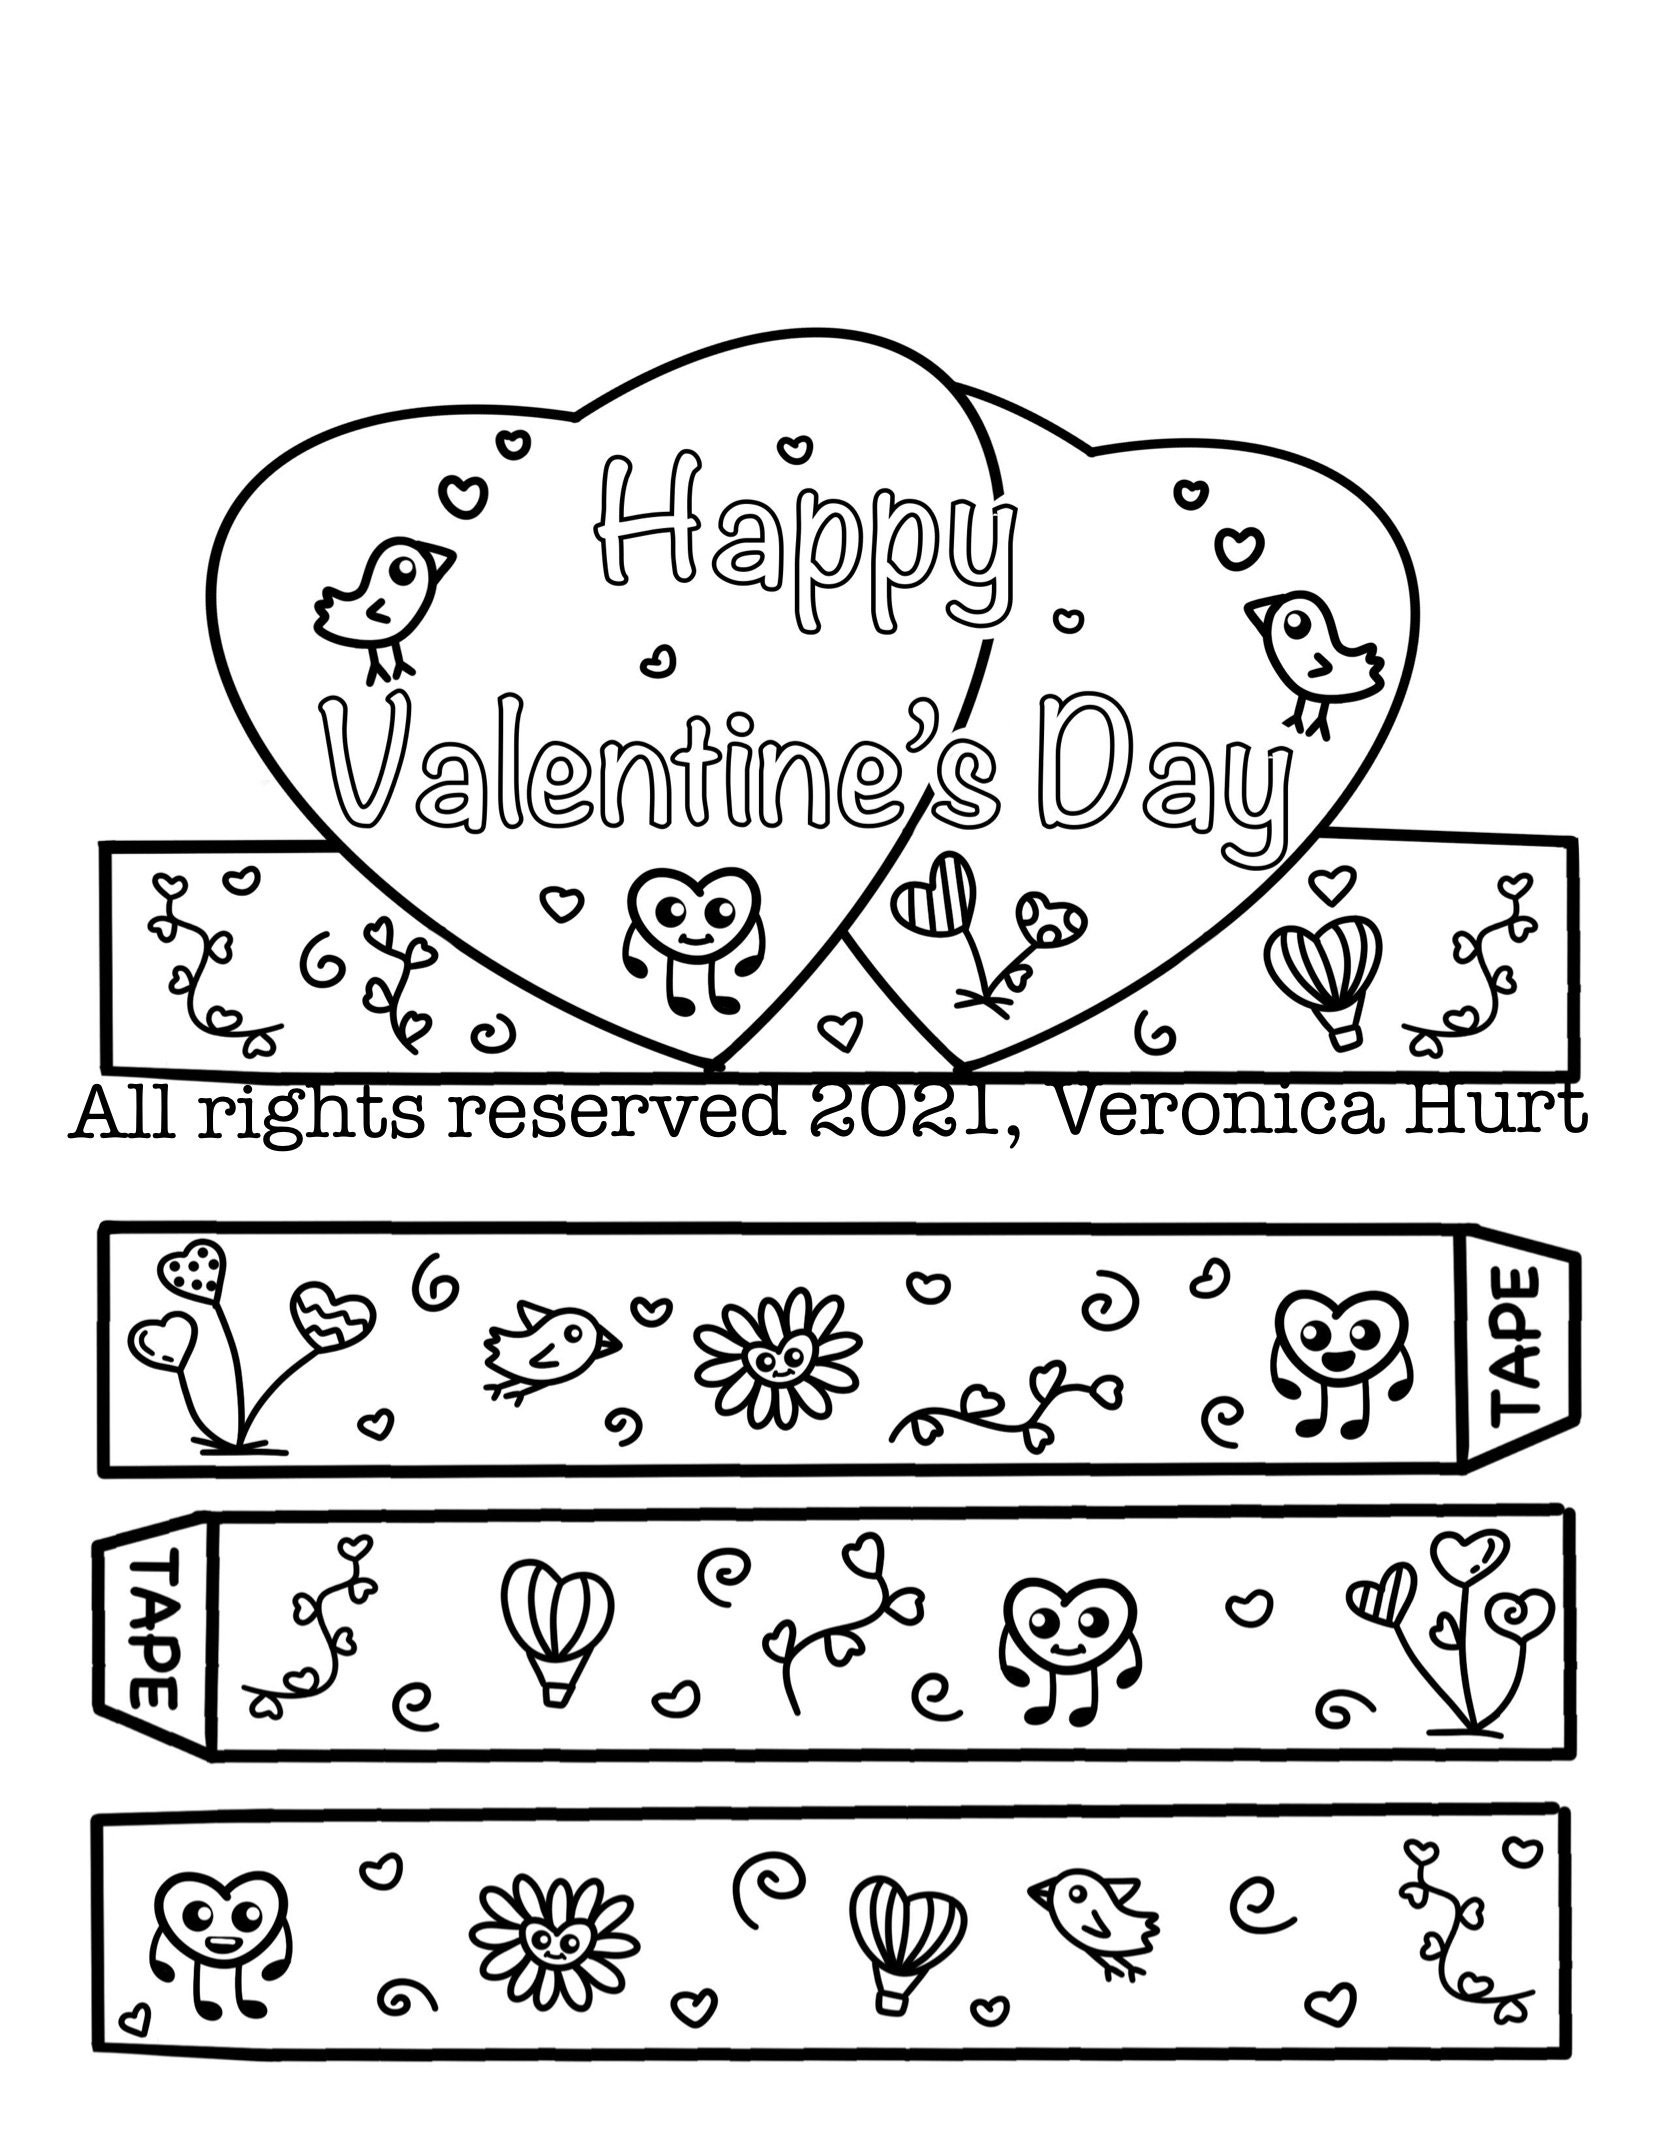 Happy Valentine's Day Paper Crown Printable Coloring Craft Activity